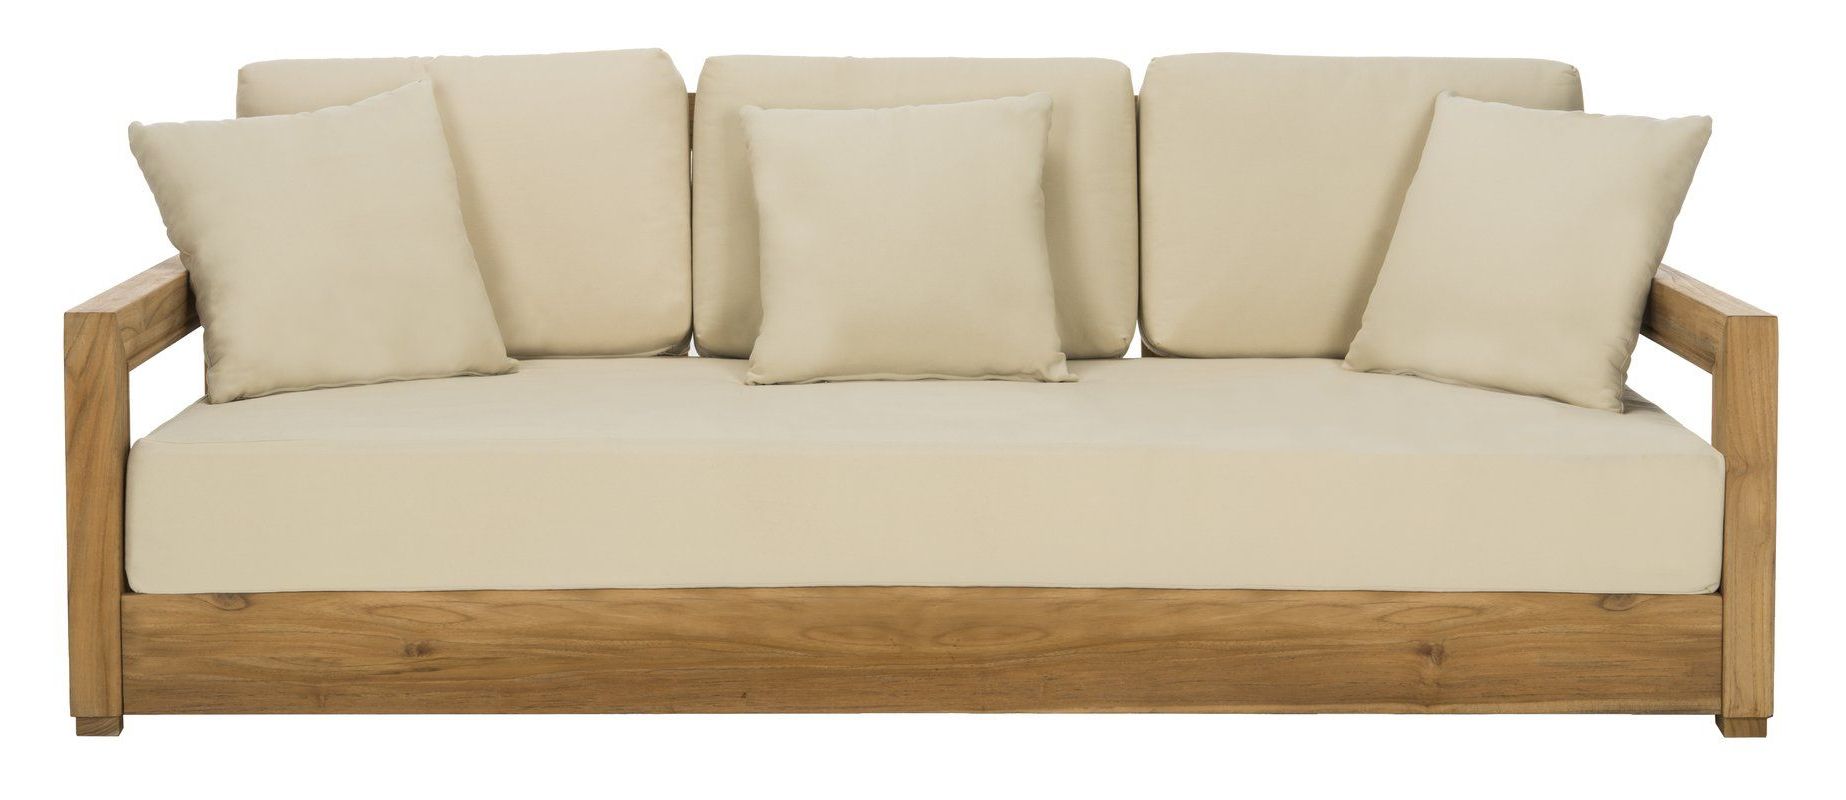 Most Up To Date Lakeland Patio Sofa With Cushions (View 1 of 20)